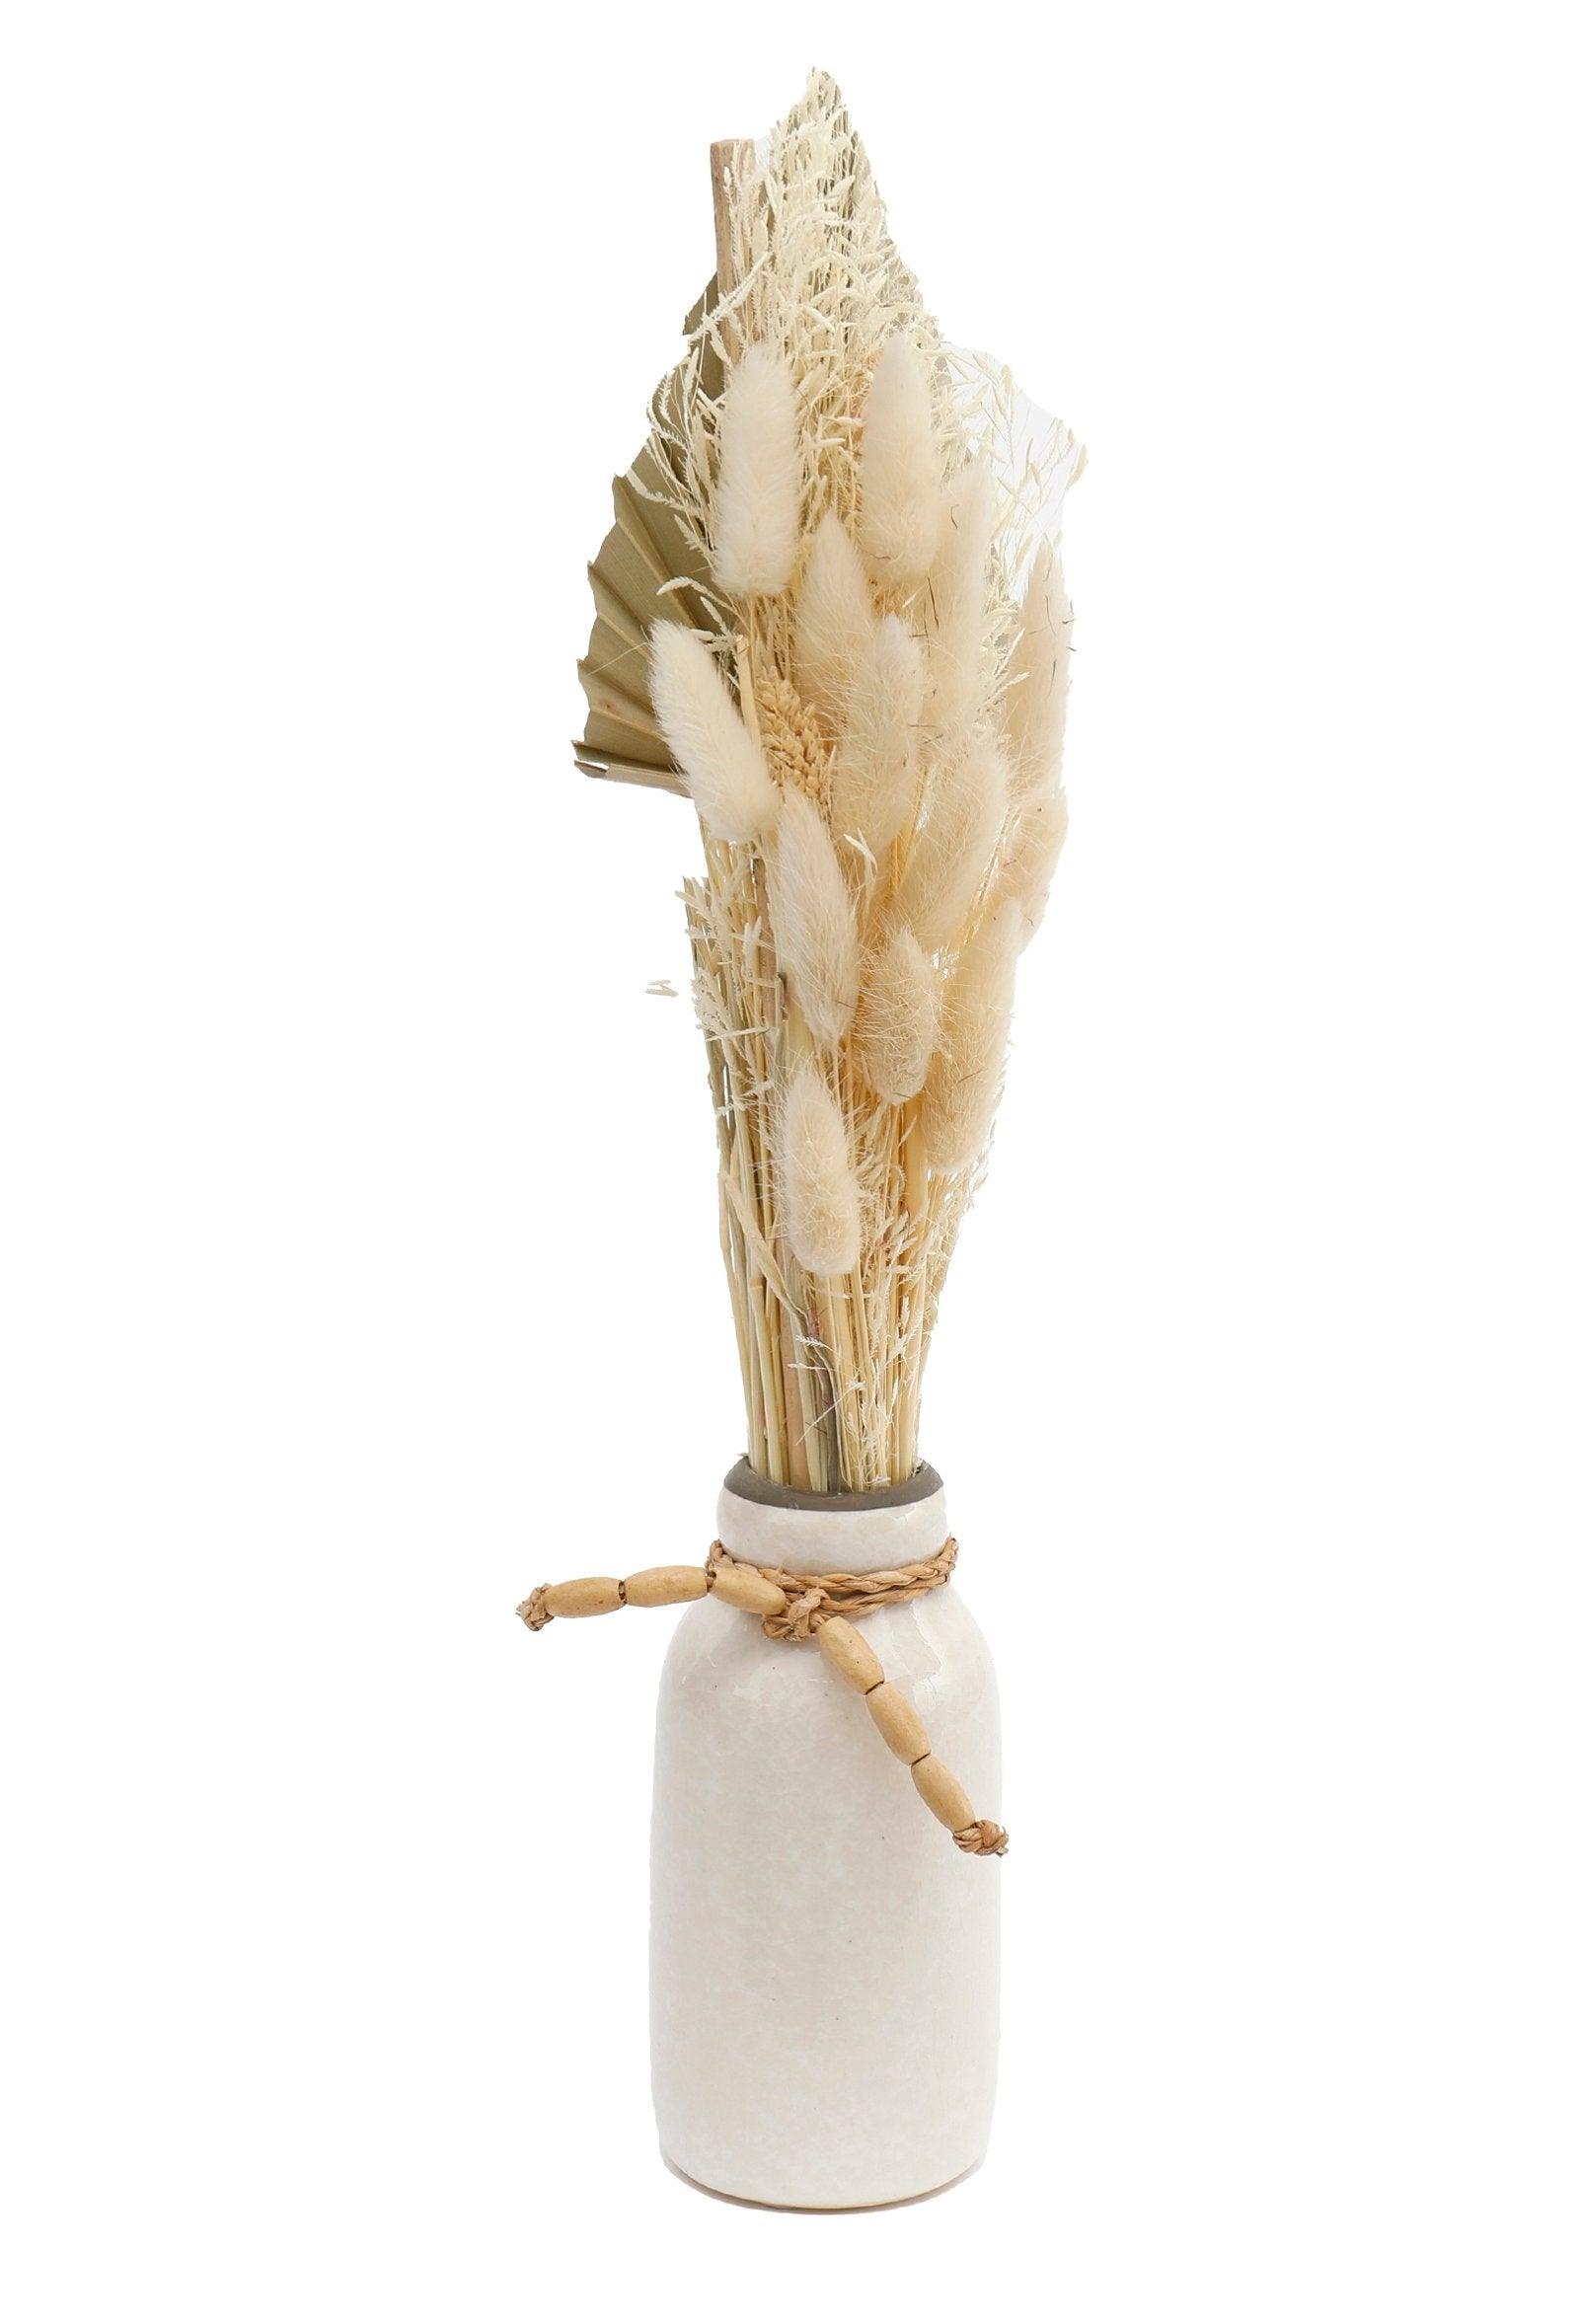 Mixed Dried Flowers In Ceramic Vase - £22.99 - Artificial Plants 